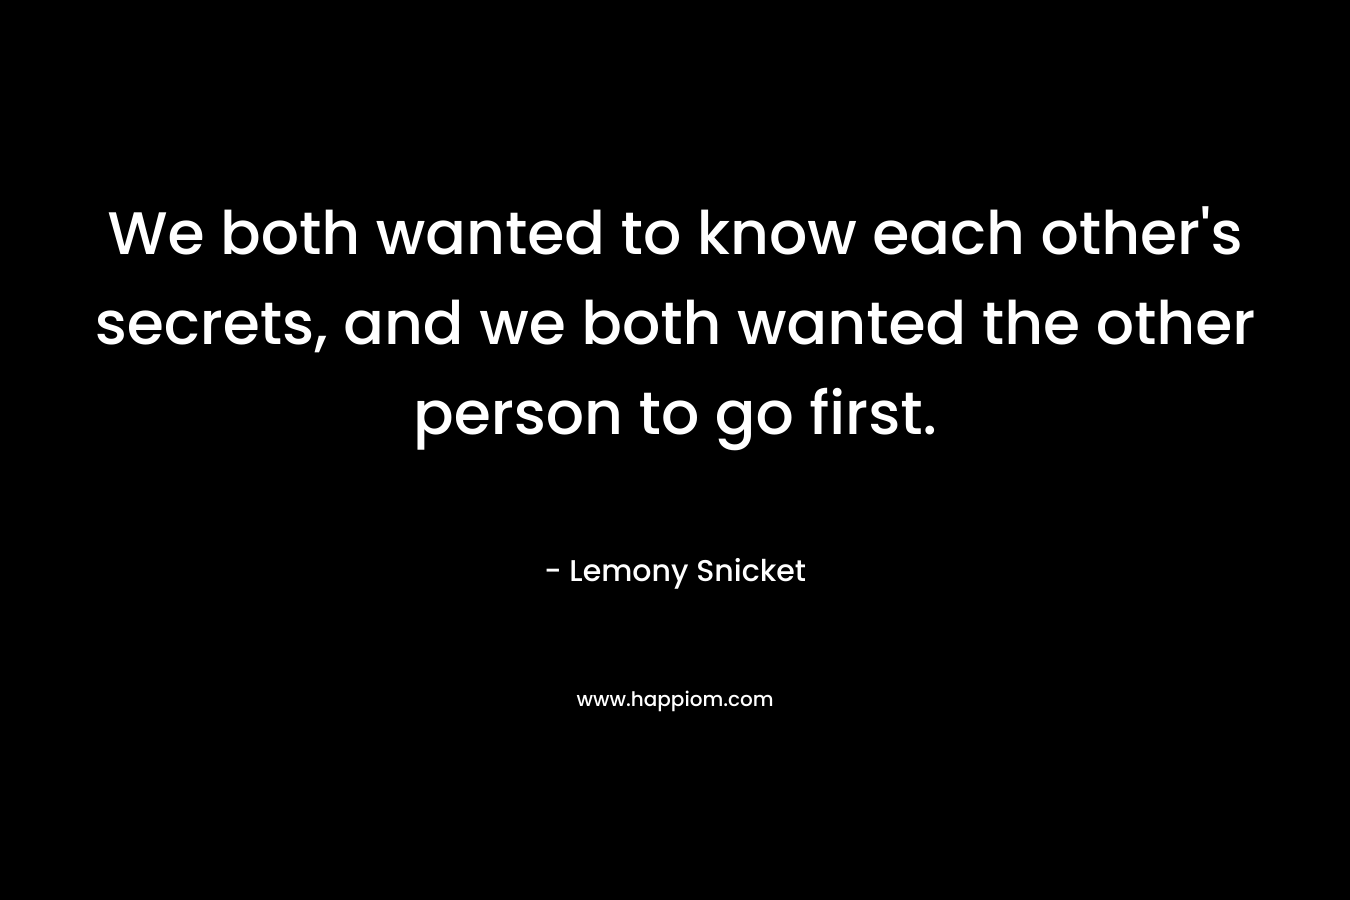 We both wanted to know each other's secrets, and we both wanted the other person to go first.